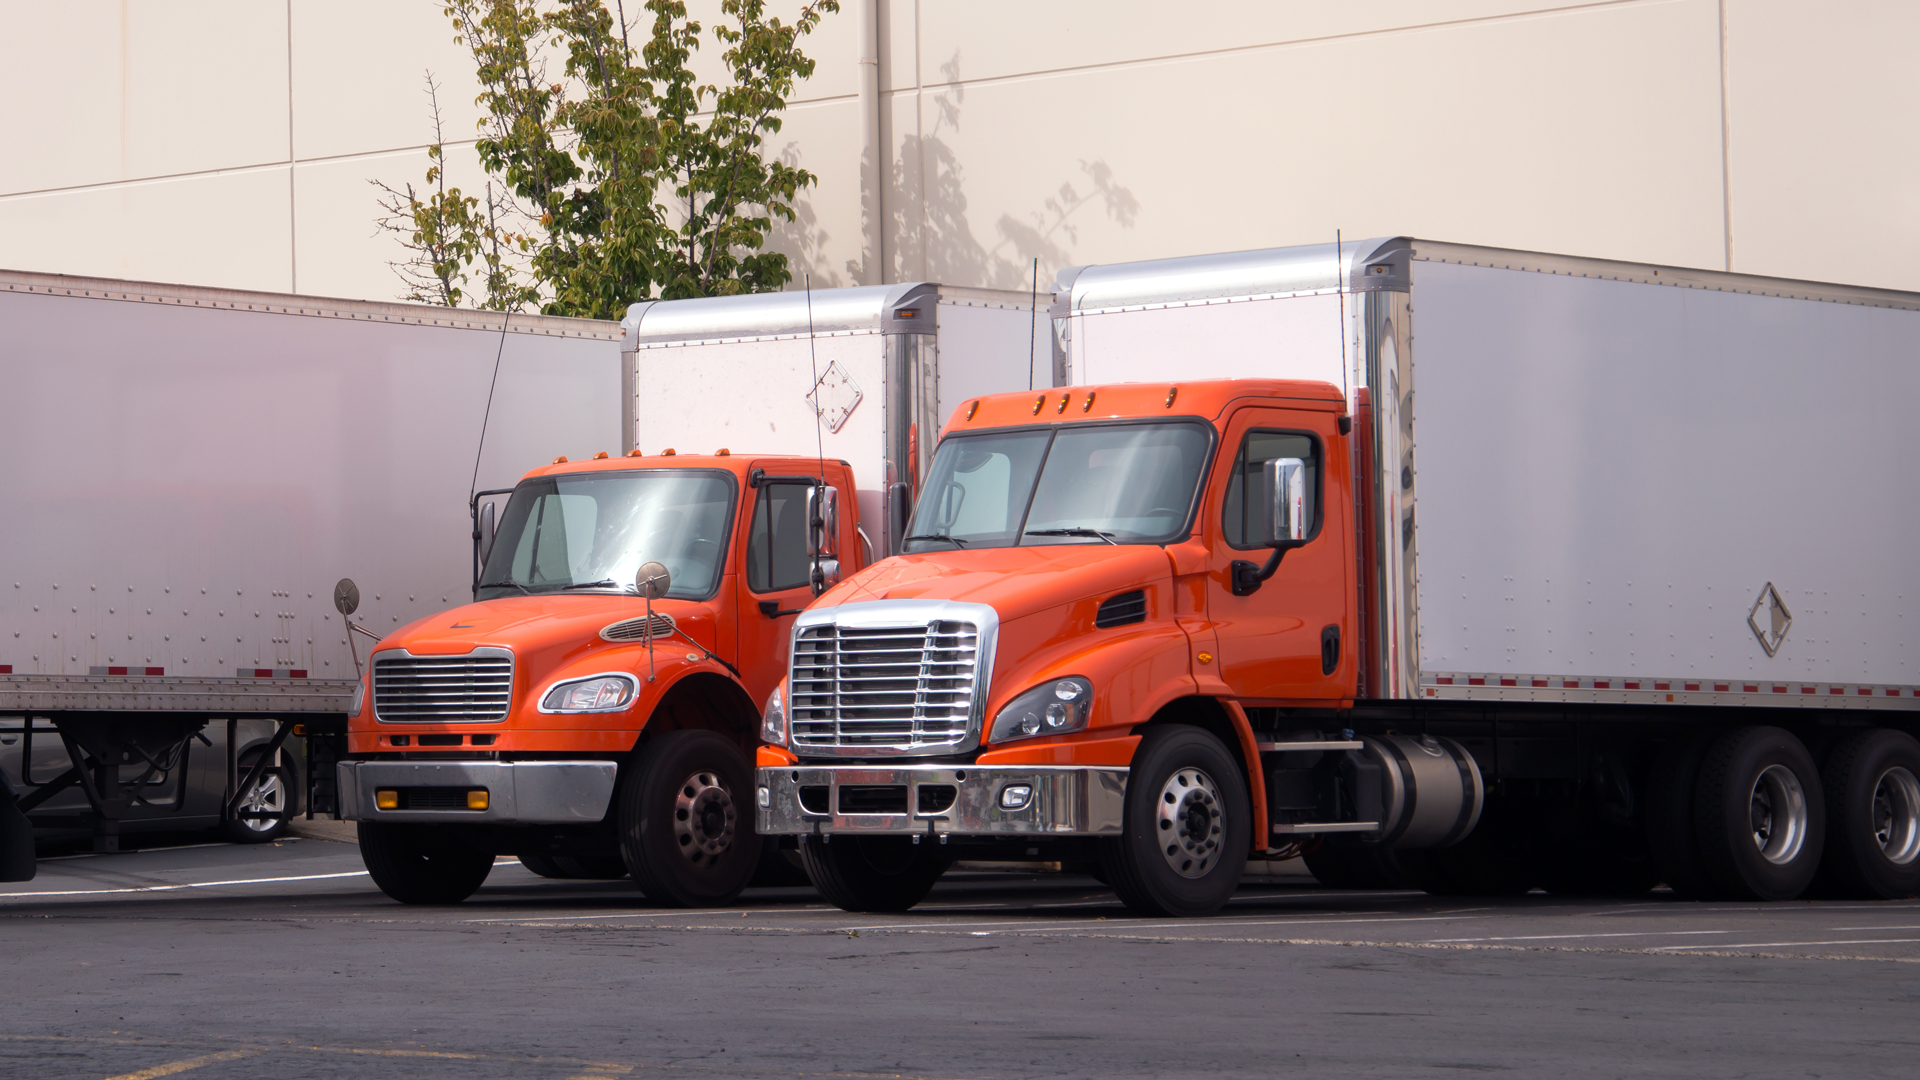 Two parked freight trucks with orange cabs